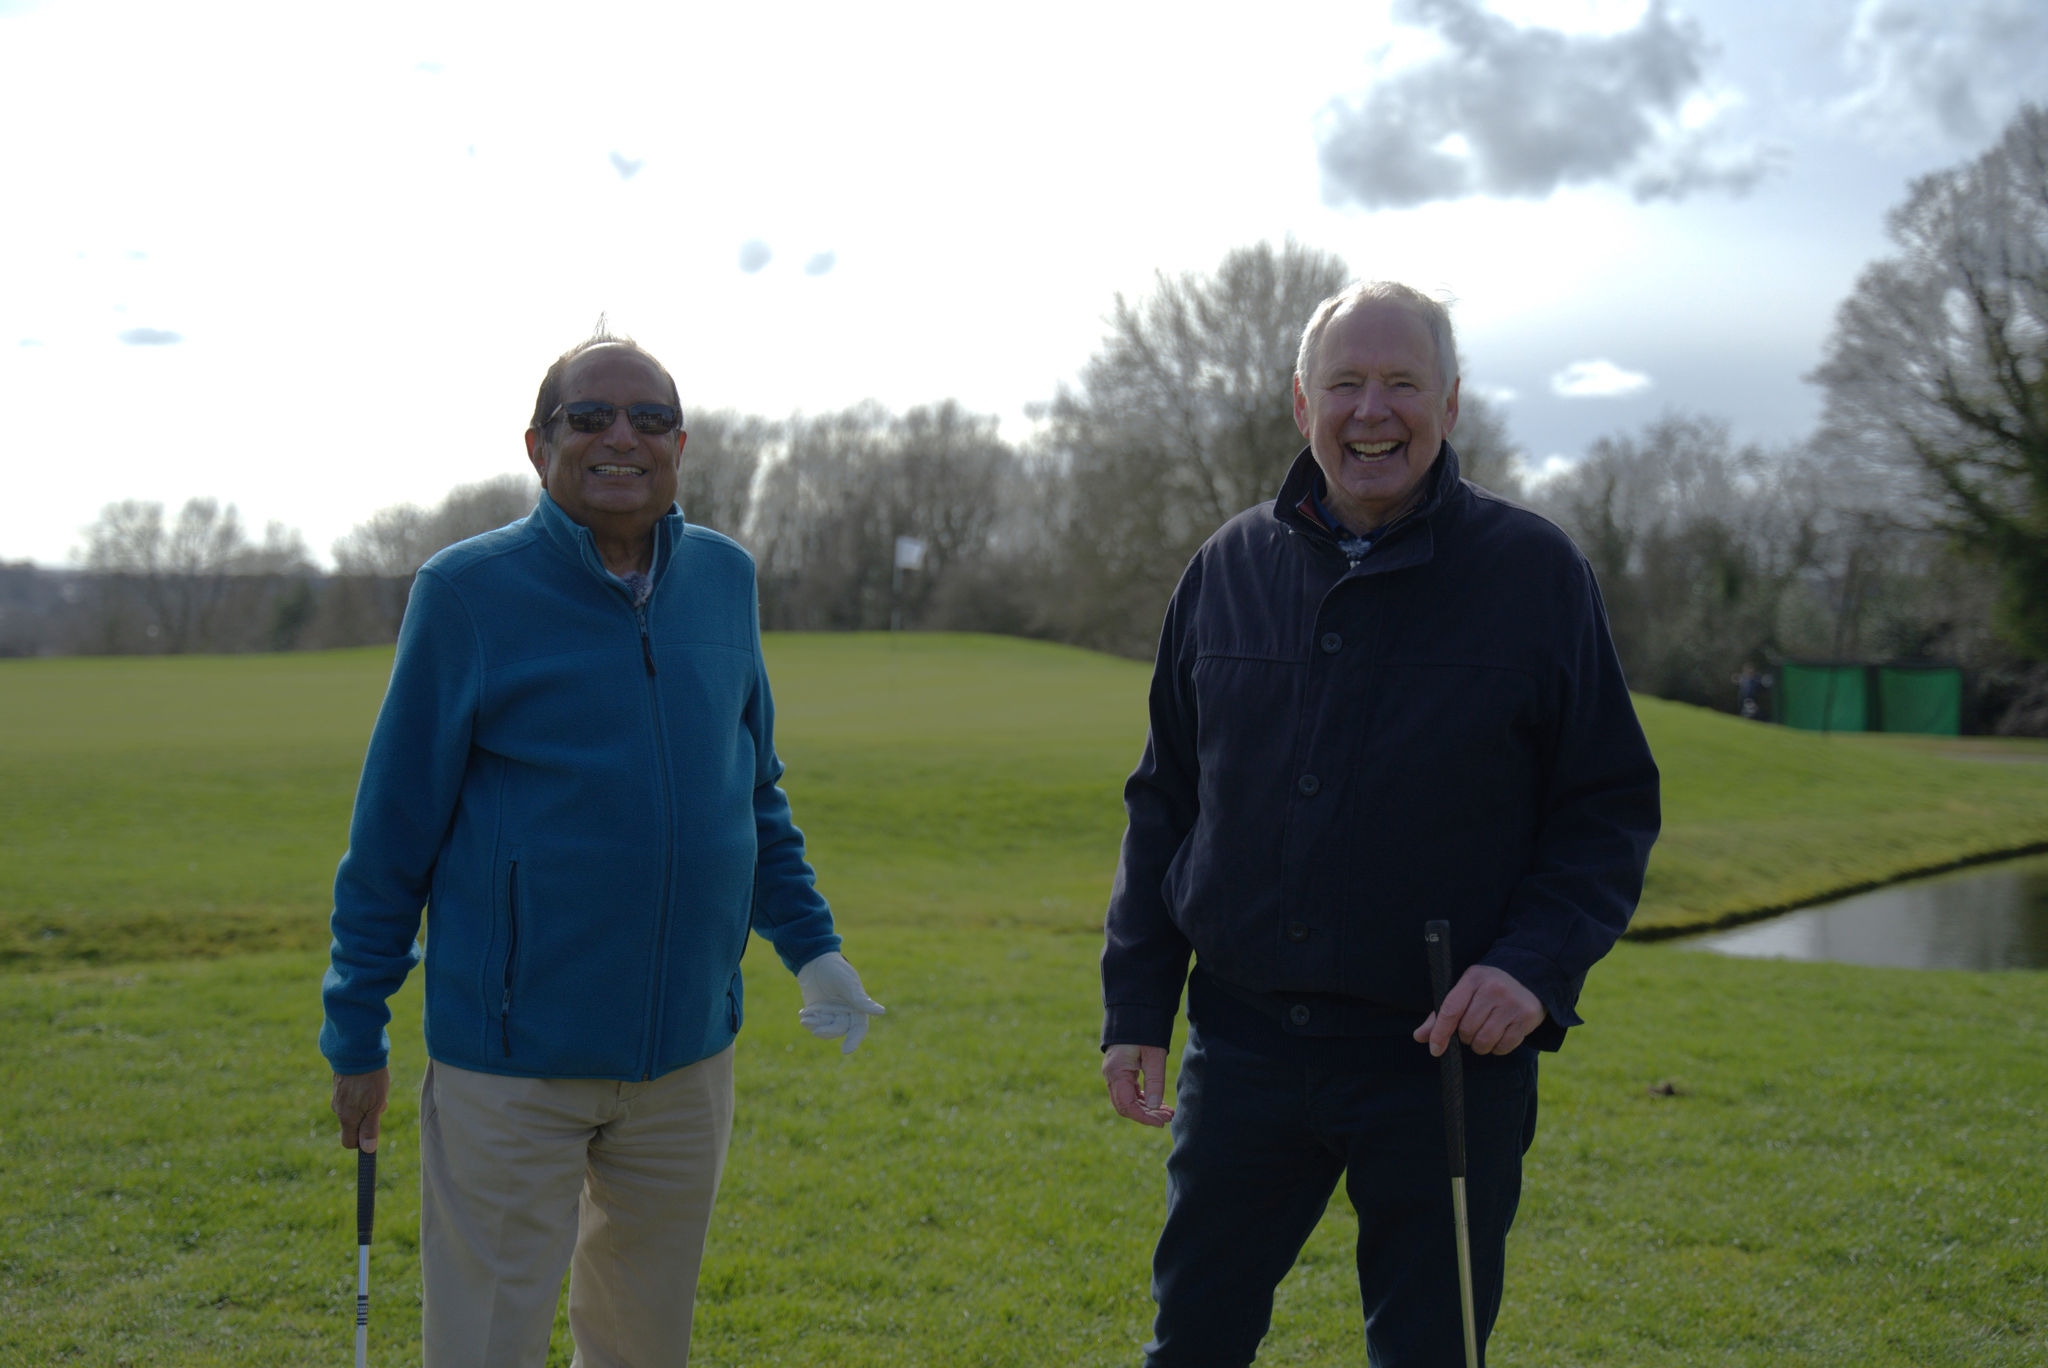 Podcast presenter Nick Owen on golf course with GenesisCare prostate cancer patient Kanty